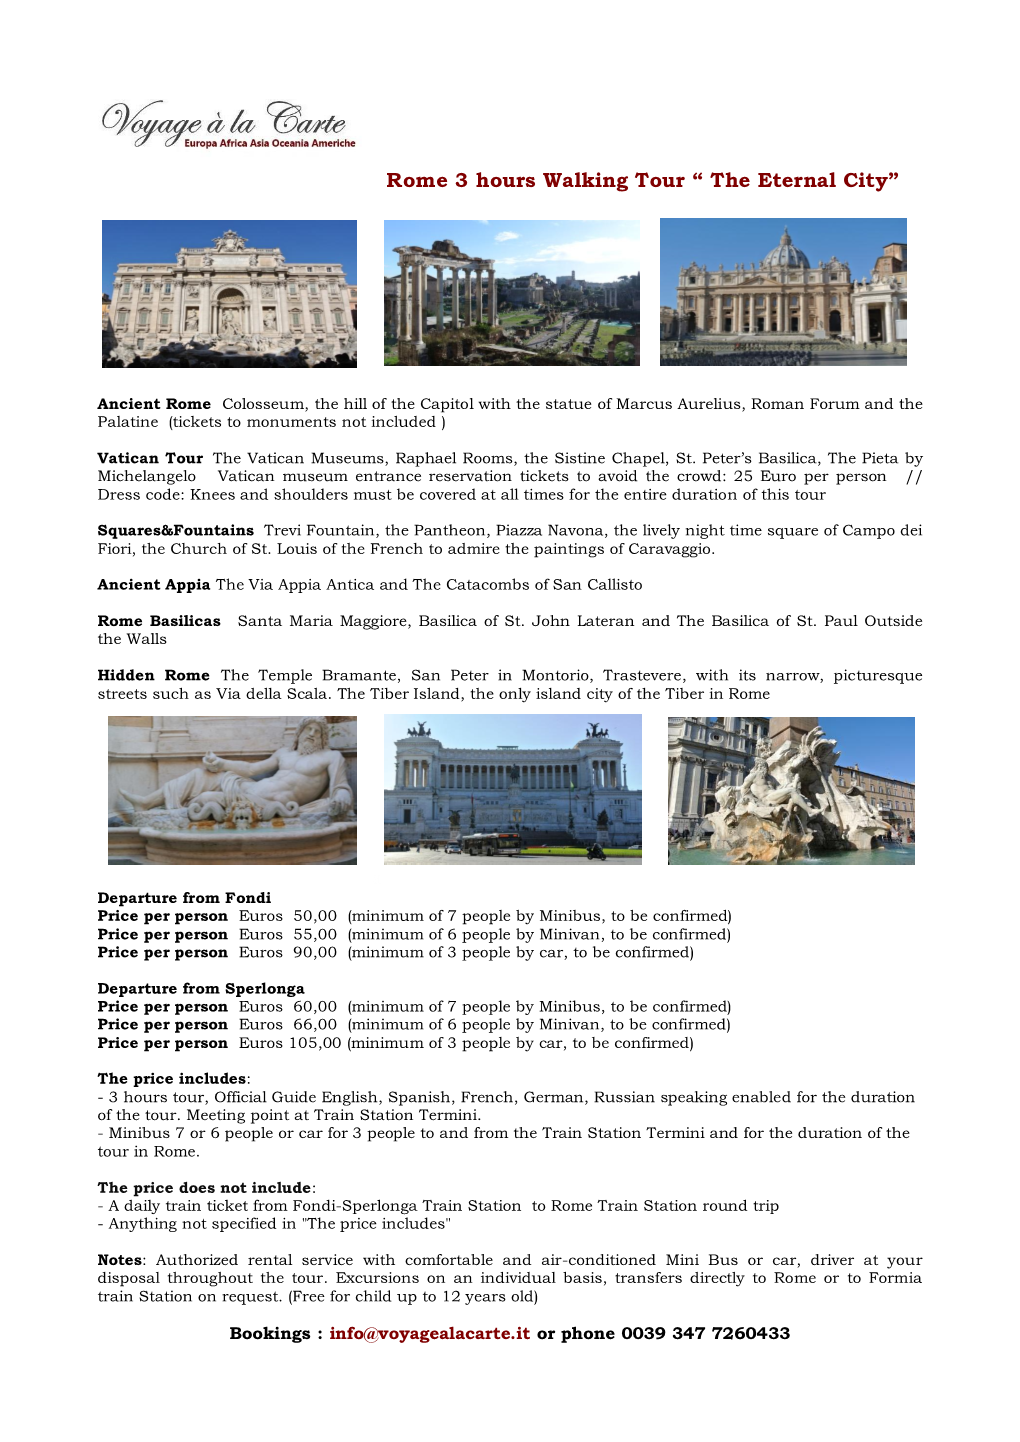 Rome 3 Hours Walking Tour “ the Eternal City” A